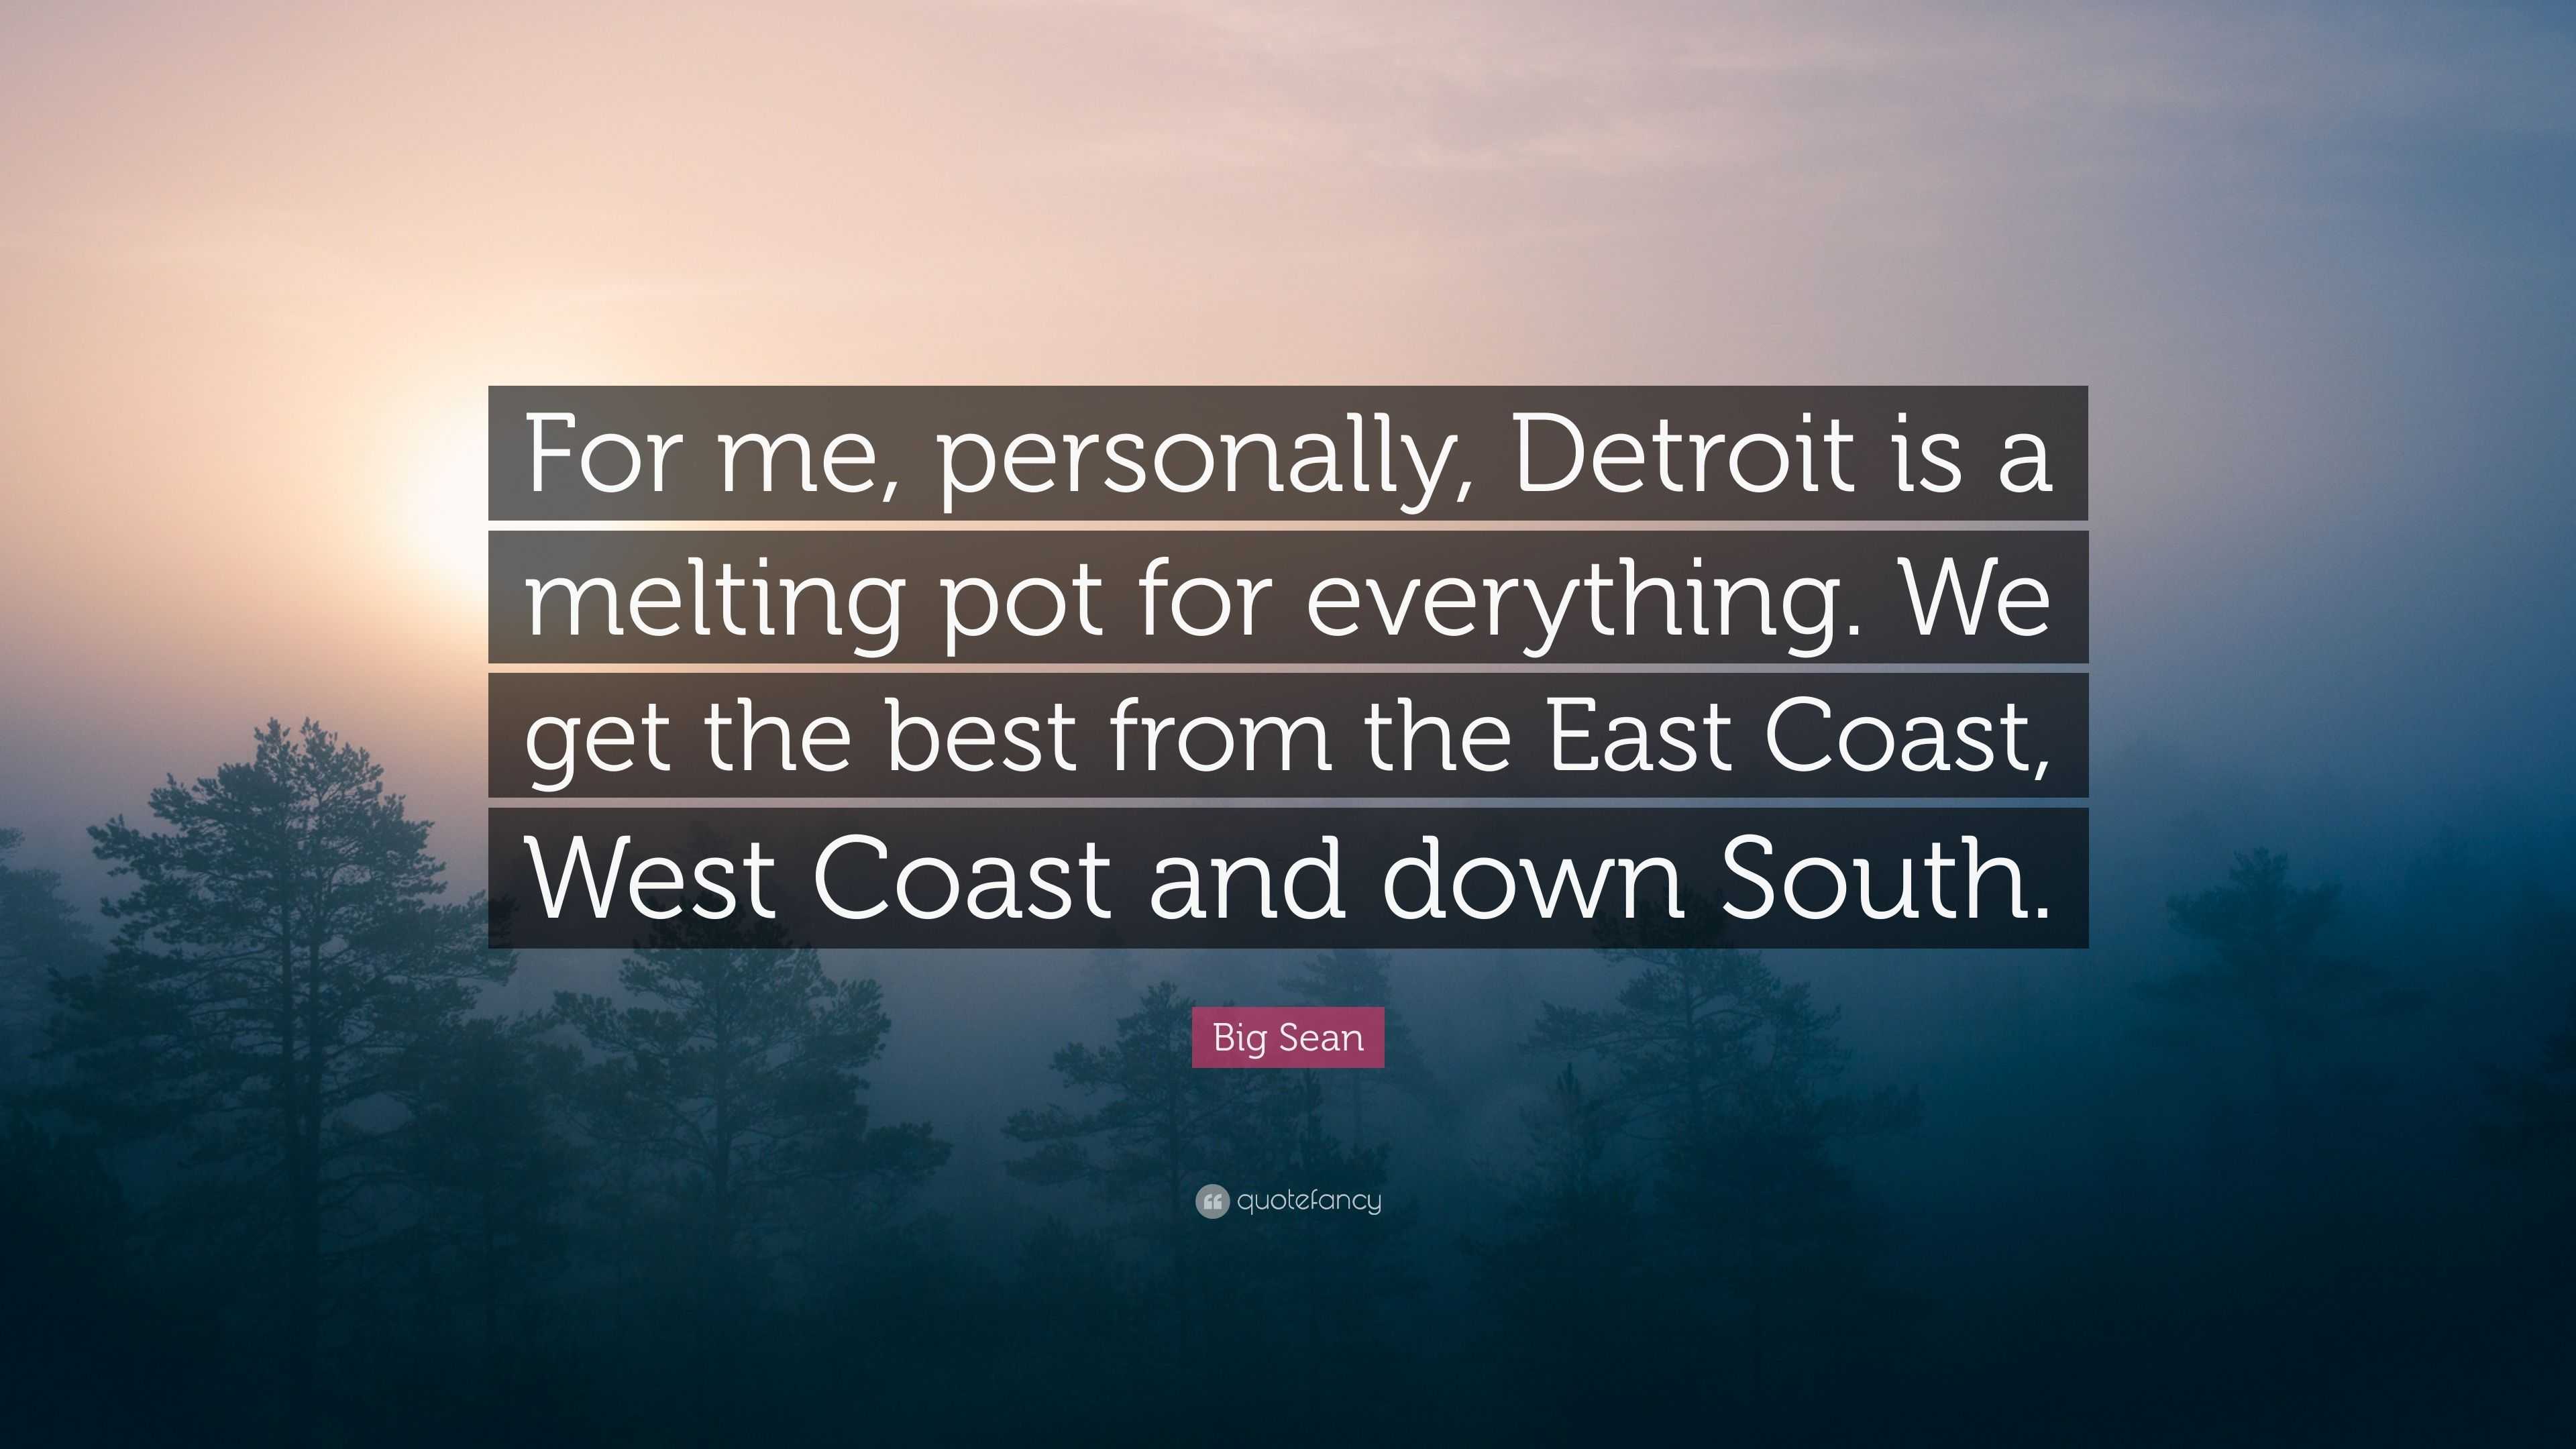 het internet Vooroordeel Uitgebreid Big Sean Quote: “For me, personally, Detroit is a melting pot for  everything. We get the best from the East Coast, West Coast and down So...”